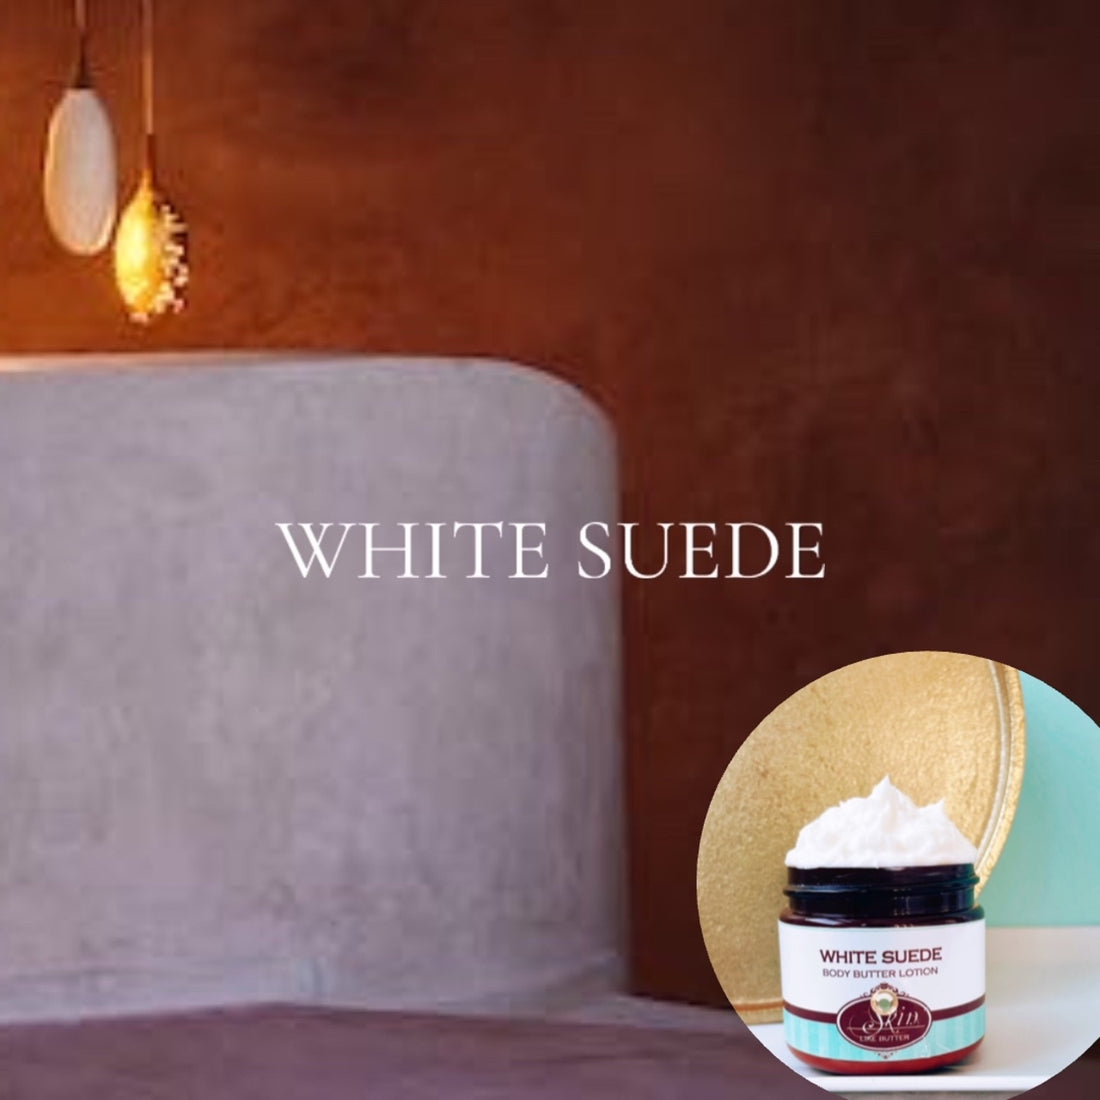 WHITE SUEDE scented Body Butter, waterfree and non-greasy, vegan